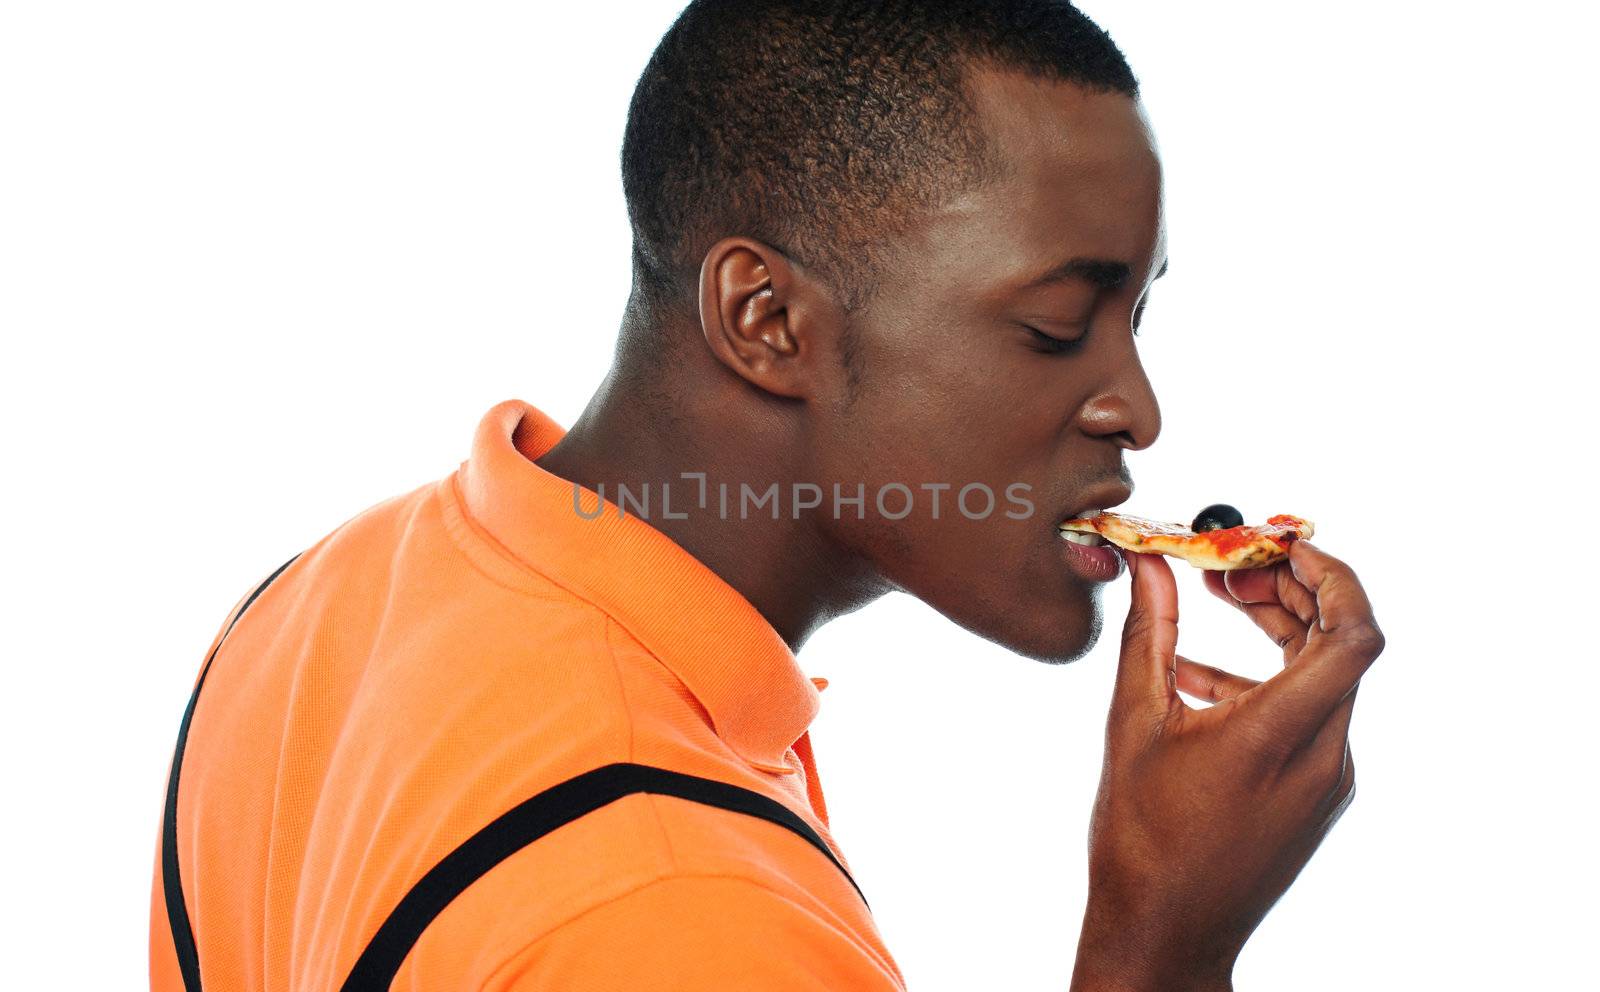 Young man eating a slice of pizza by stockyimages